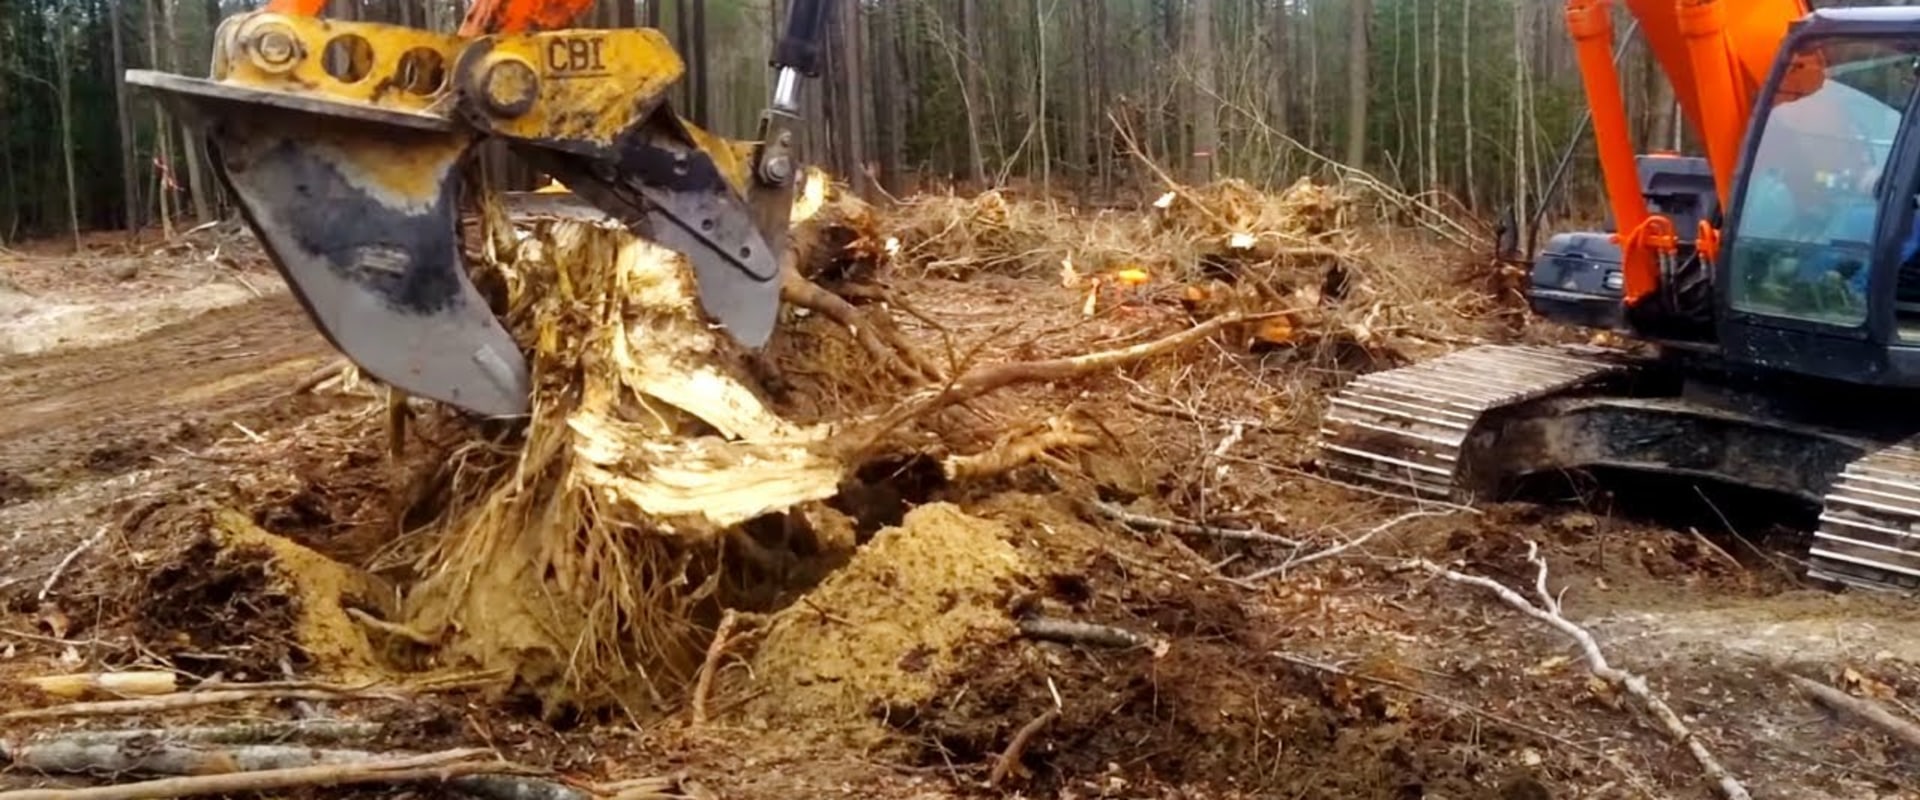 Removing Stumps with a Backhoe or Excavator